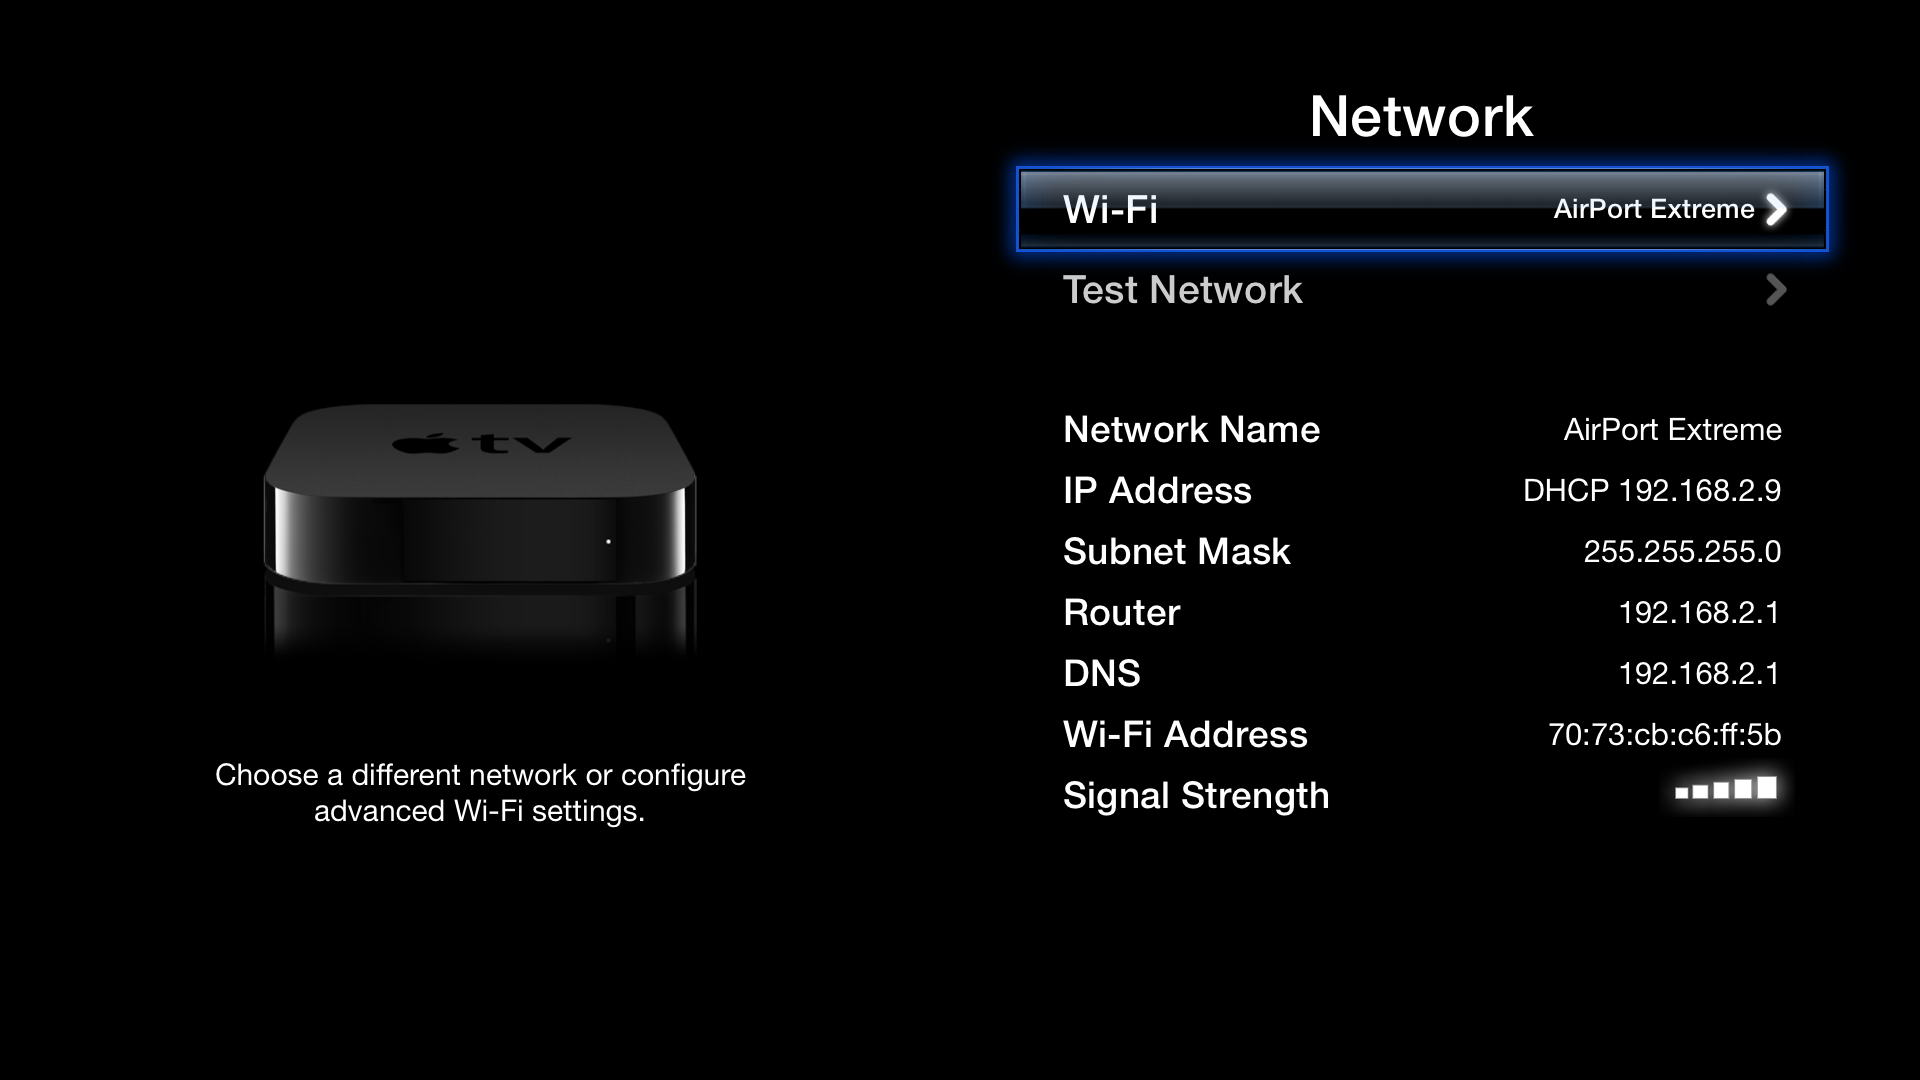 Vild Let rense Apple TV (2nd and 3rd generation): Troubleshooting Wi-Fi networks and  connections - Administrivia